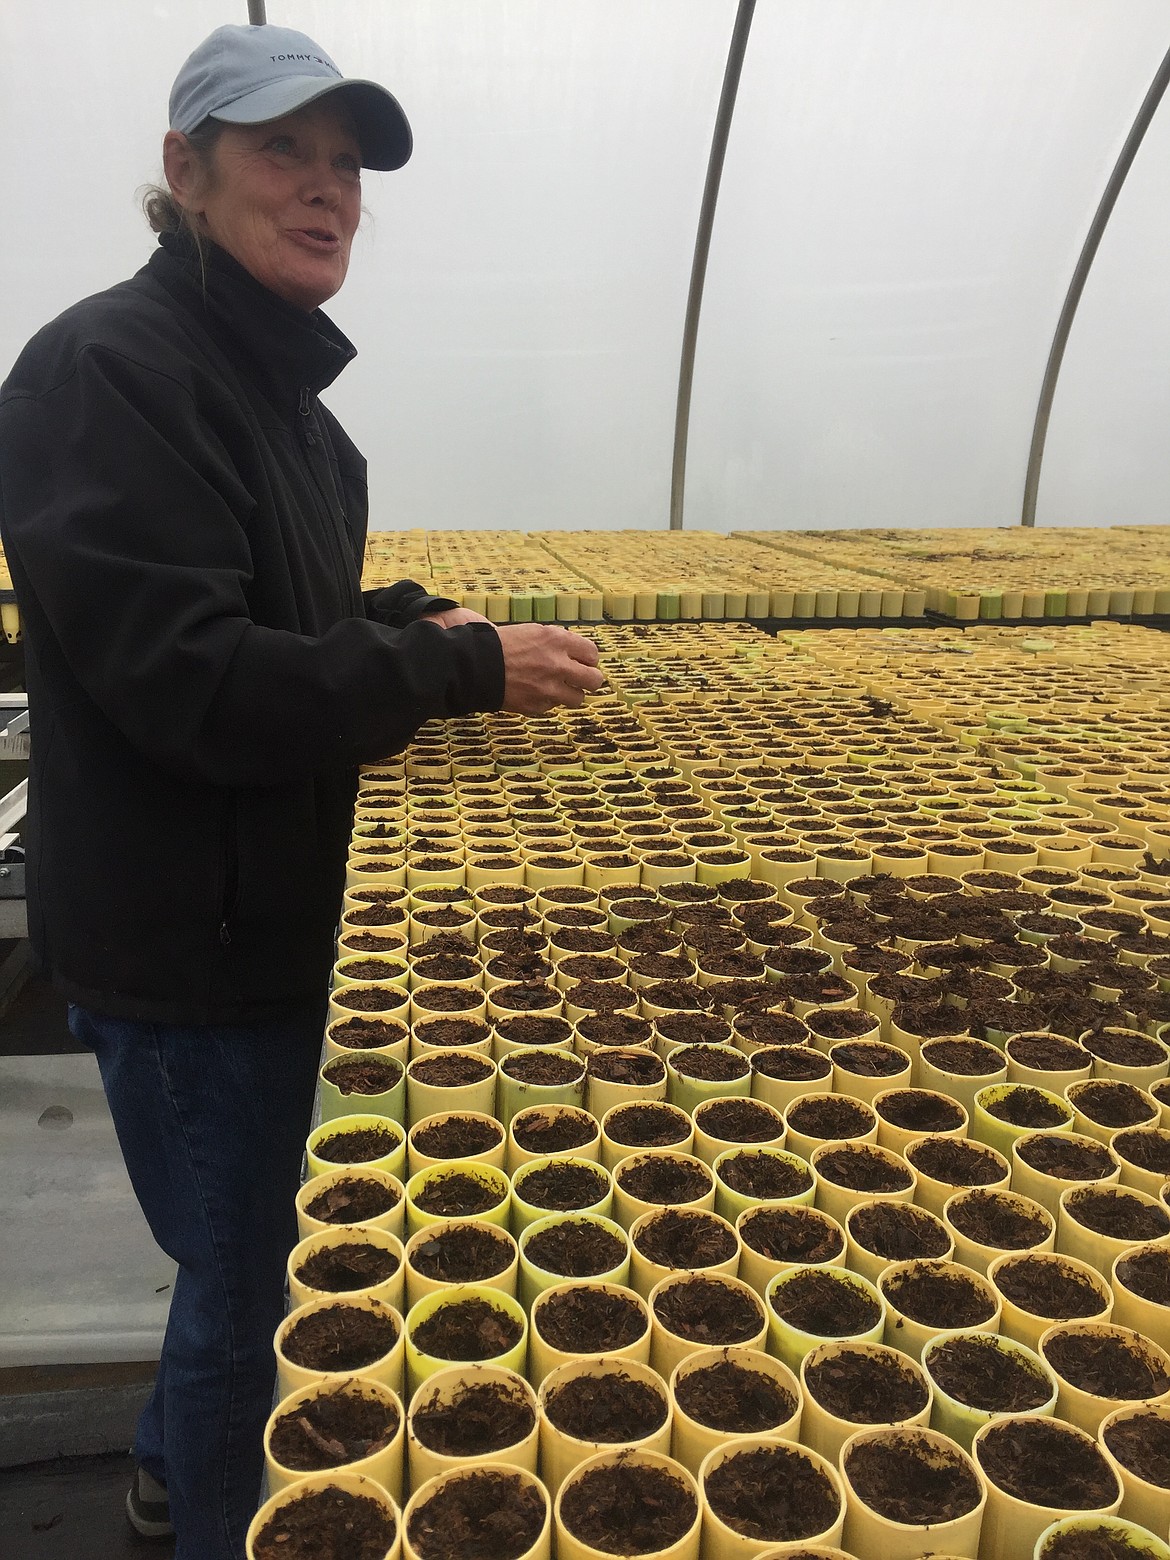 Yvonne Holman sows whitebark pine seeds at the Coeur d'Alene Forest Service nursery. She estimates she has sown 200,000 of the 300,000 seeds the nursery will grow this year. (JENNIFER PASSARO/Press)